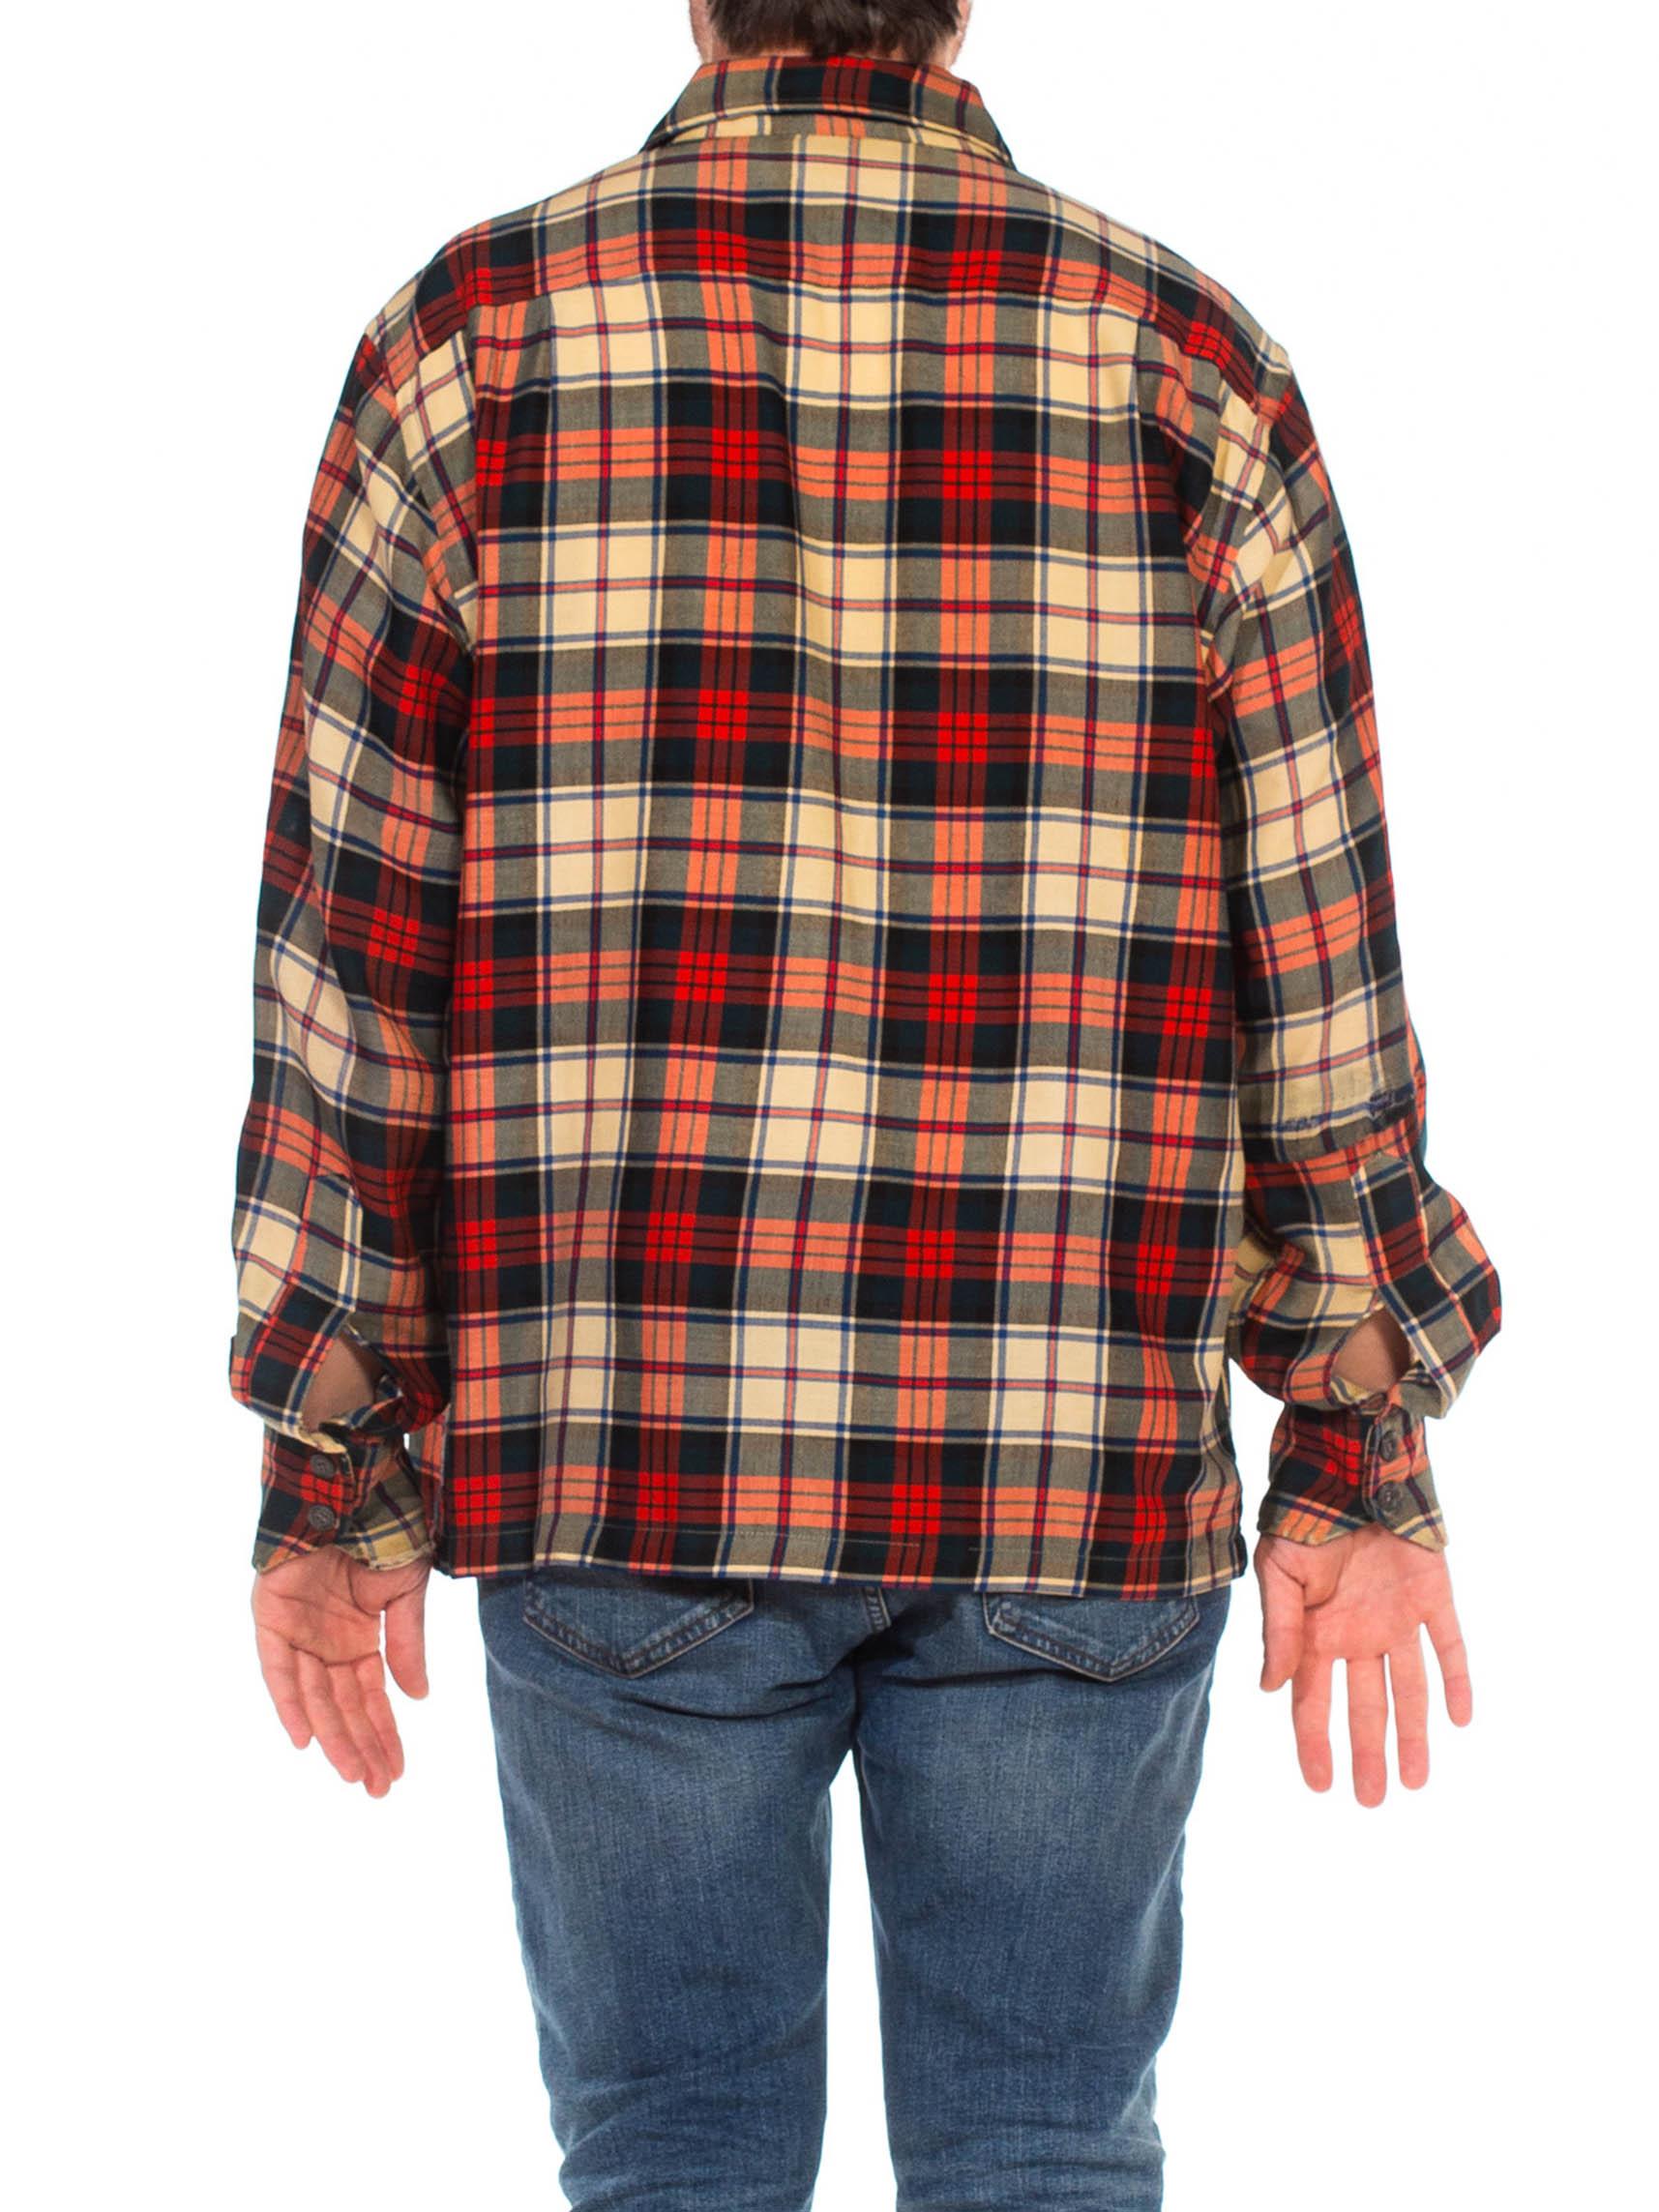 1940S Red Plaid Wool/Cotton Lightweight Men's Shirt For Sale 2